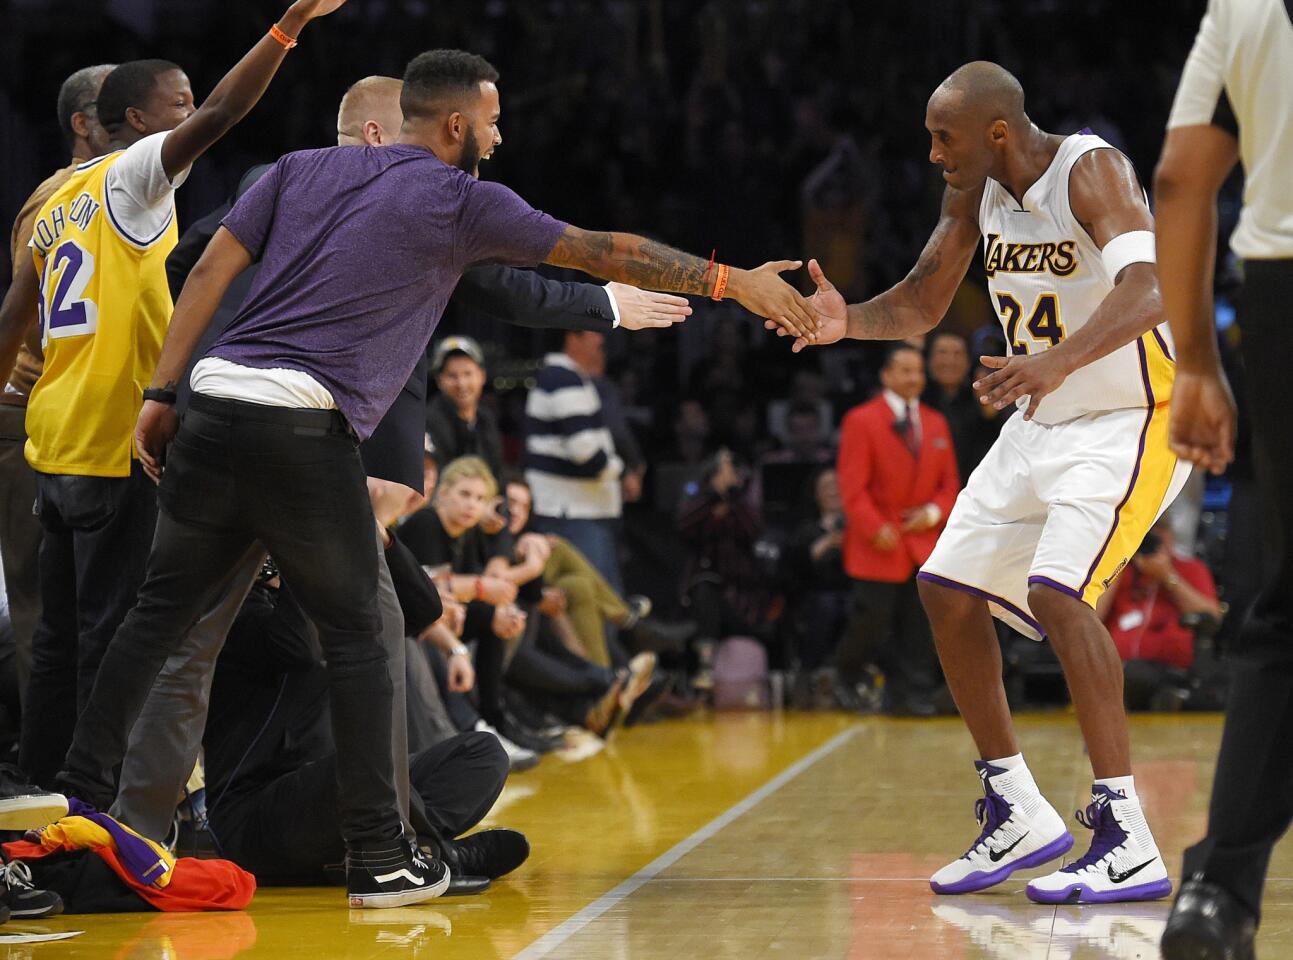 Los Angeles Lakers forward Kobe Bryant, right, celebrates with Anthony Sadler, front left and Spencer Stone, obscured, after hitting a 3-point shot during the second half of an NBA basketball game against the Detroit Pistons, Sunday, Nov. 15, 2015, in Los Angeles. Sadler, and Stone are two of three Americans who helped stop a terrorist attack on a train in France in August. The Lakers won 97-85. (AP Photo/Mark J. Terrill)